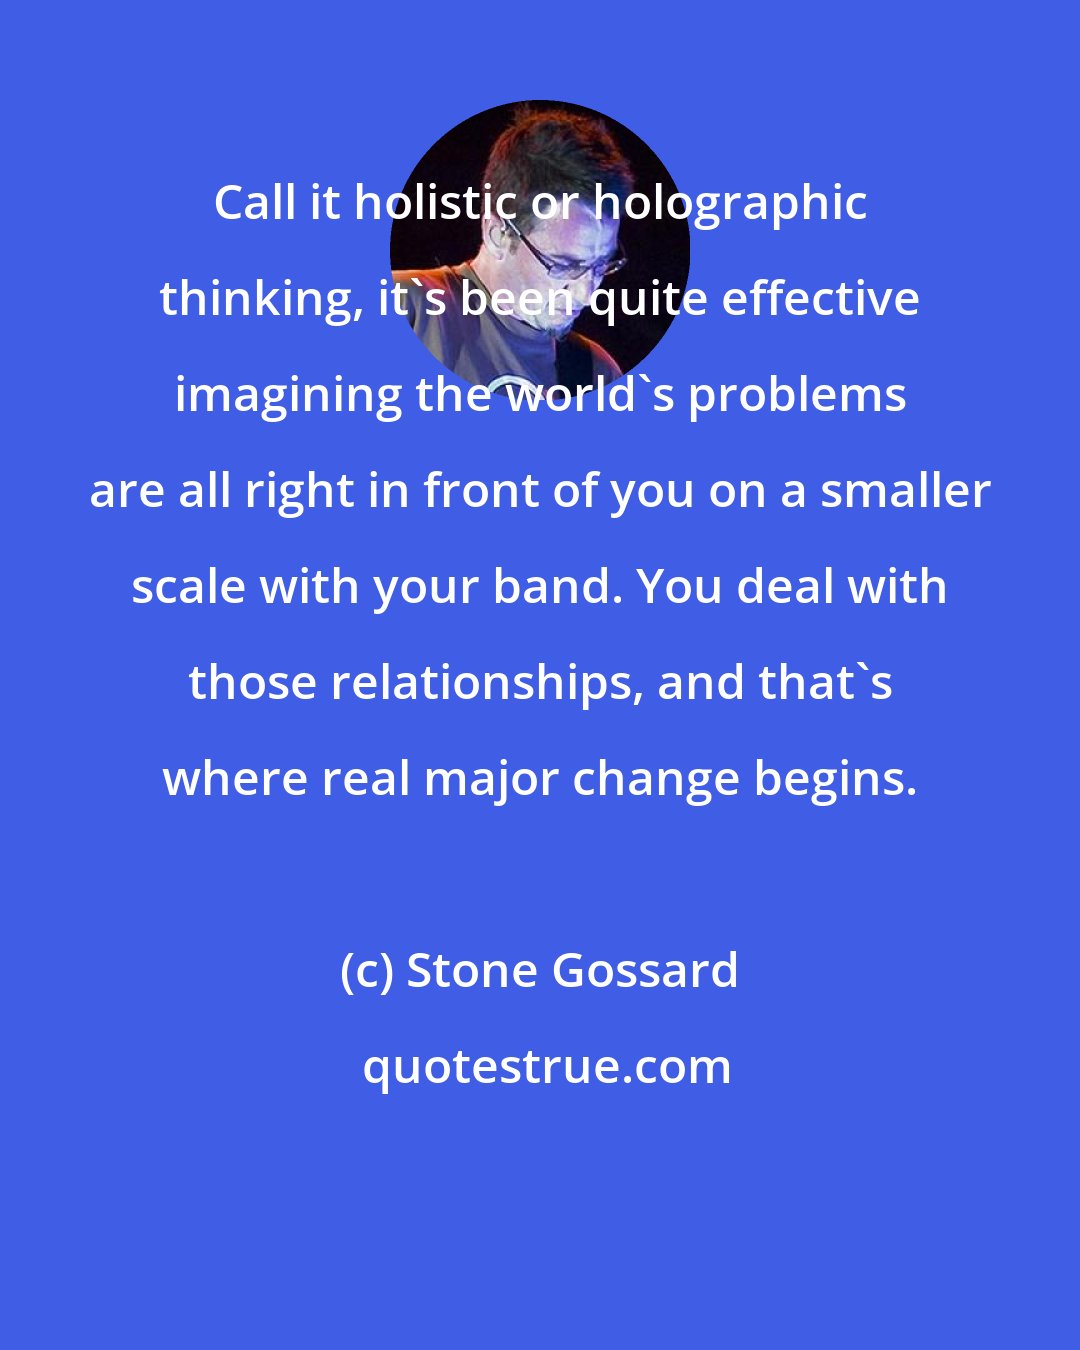 Stone Gossard: Call it holistic or holographic thinking, it's been quite effective imagining the world's problems are all right in front of you on a smaller scale with your band. You deal with those relationships, and that's where real major change begins.